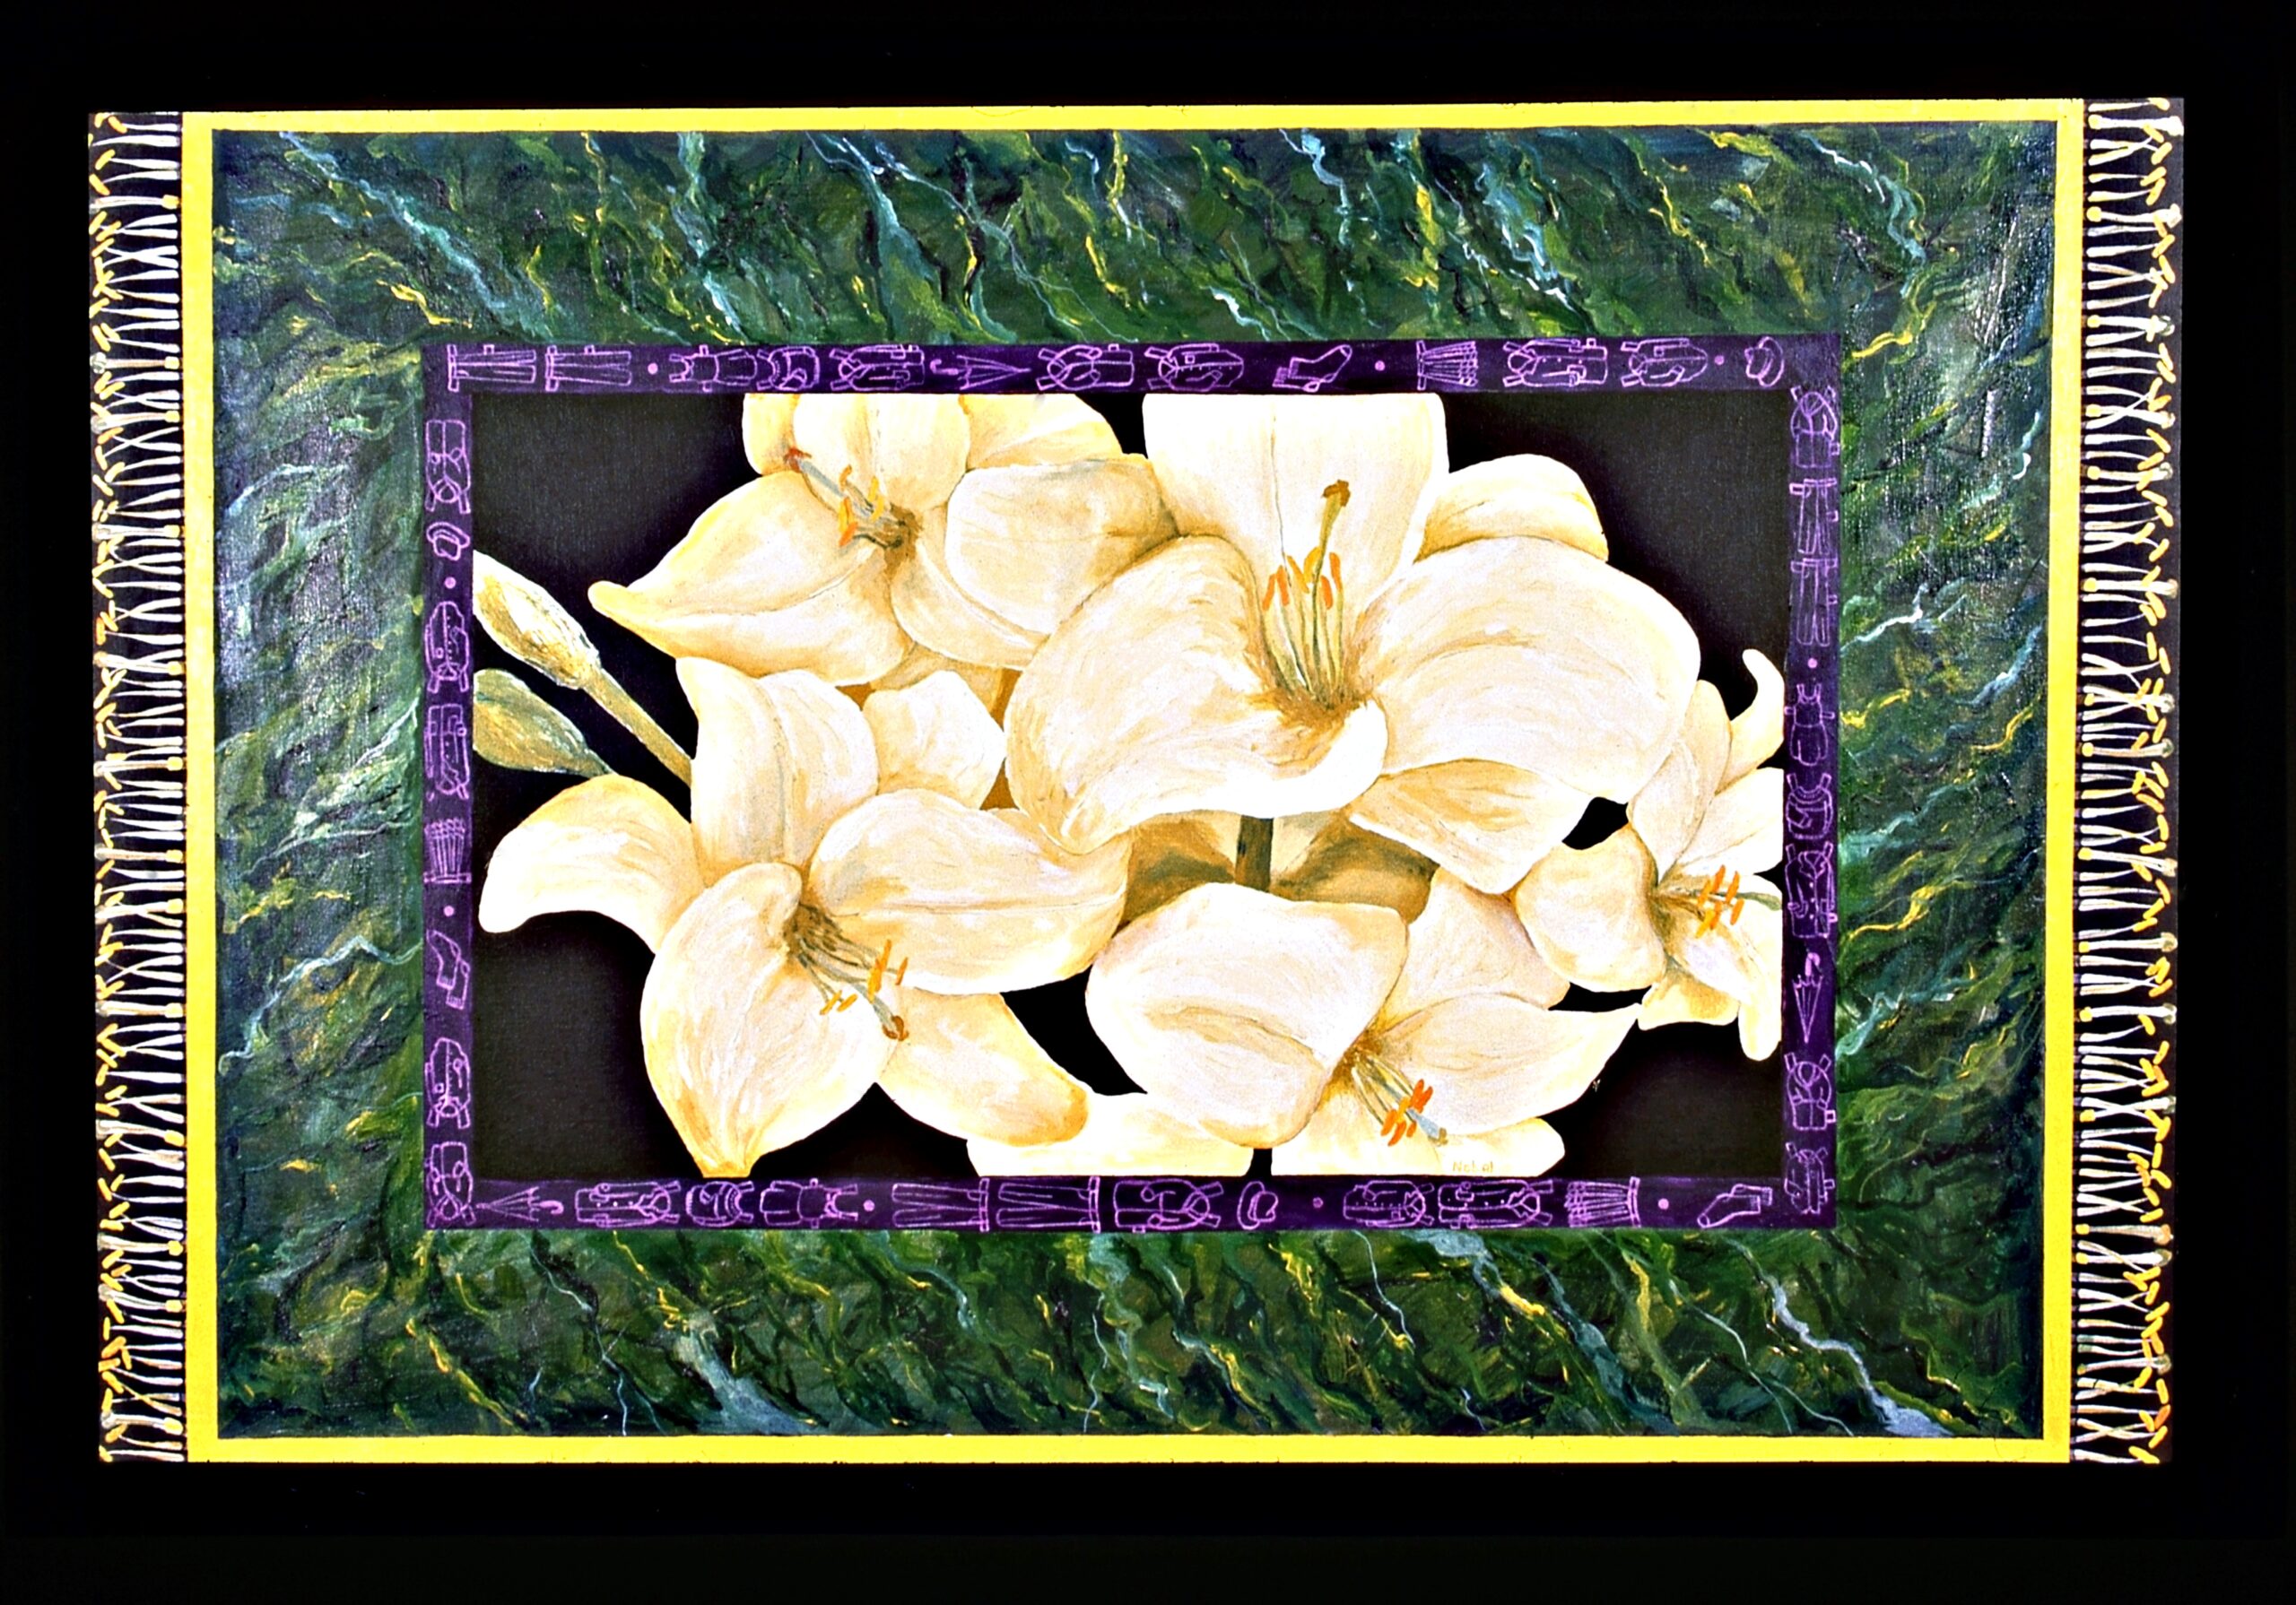 A painting featuring a bundle of white lilies, surrounded by a border of green leaves. A painted fringe of lily pistol and stamin along the sides give the impression of a Persian carpet.